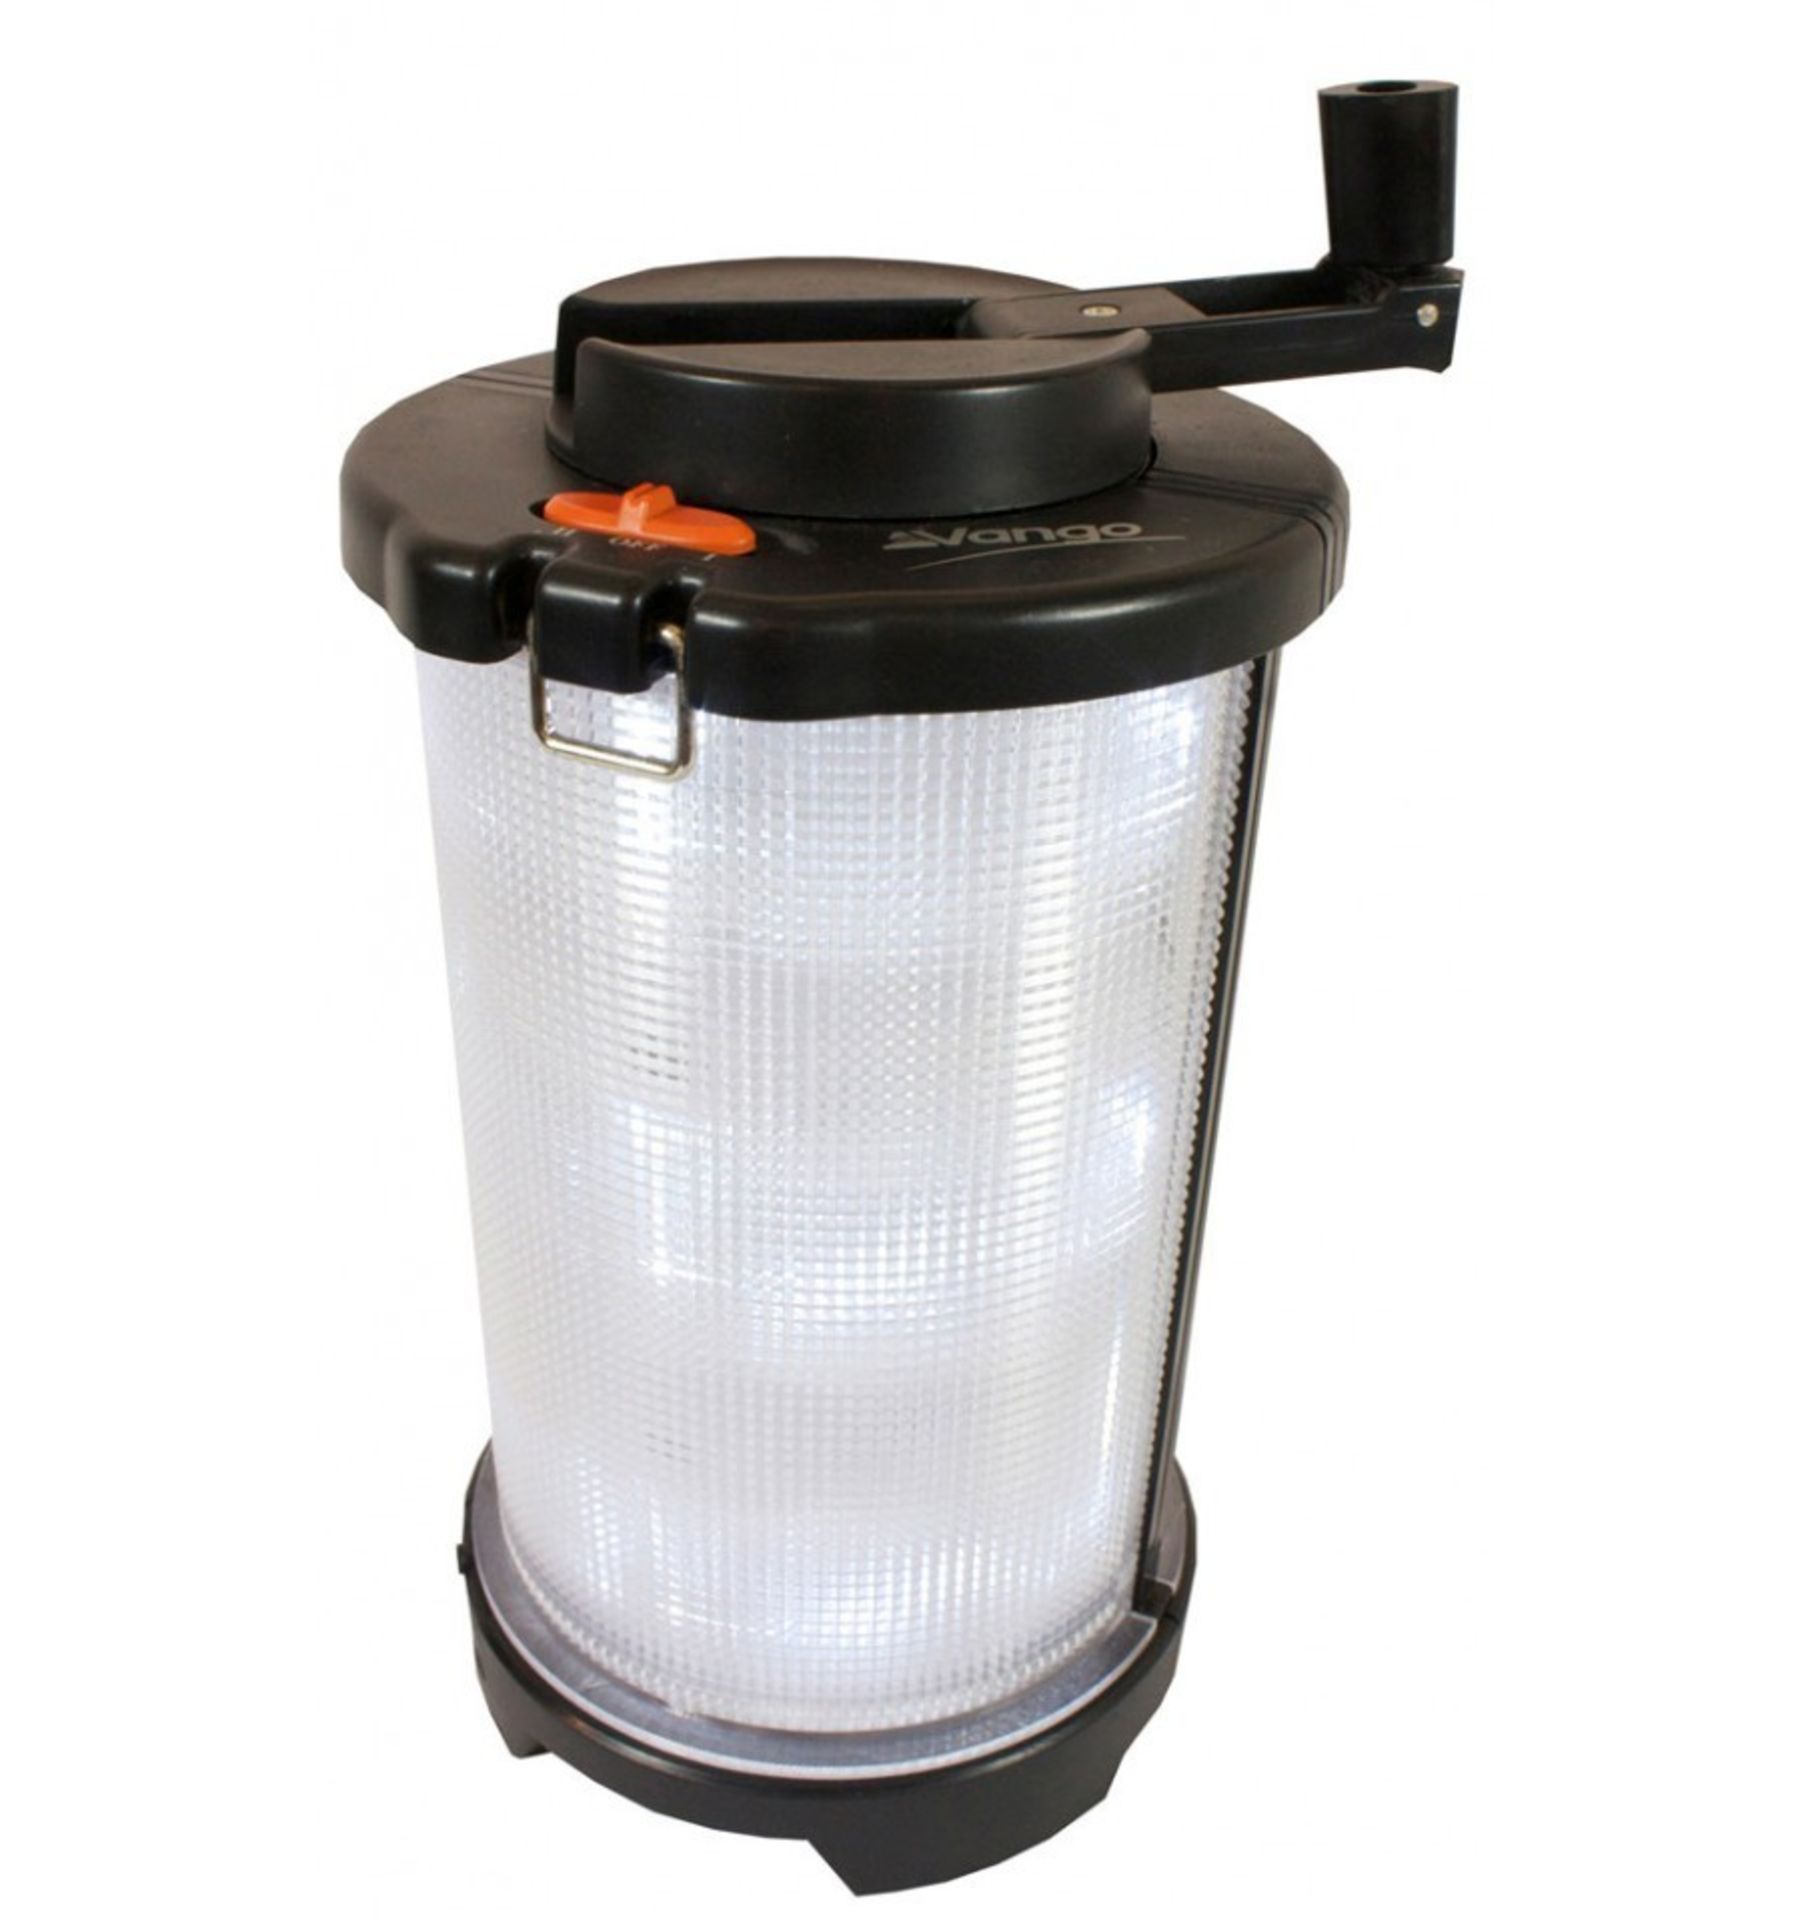 V Brand New Vango Rechargable Light Barrel Lantern - RRP £32.60 - Can Charge With Cigarette - Image 2 of 2